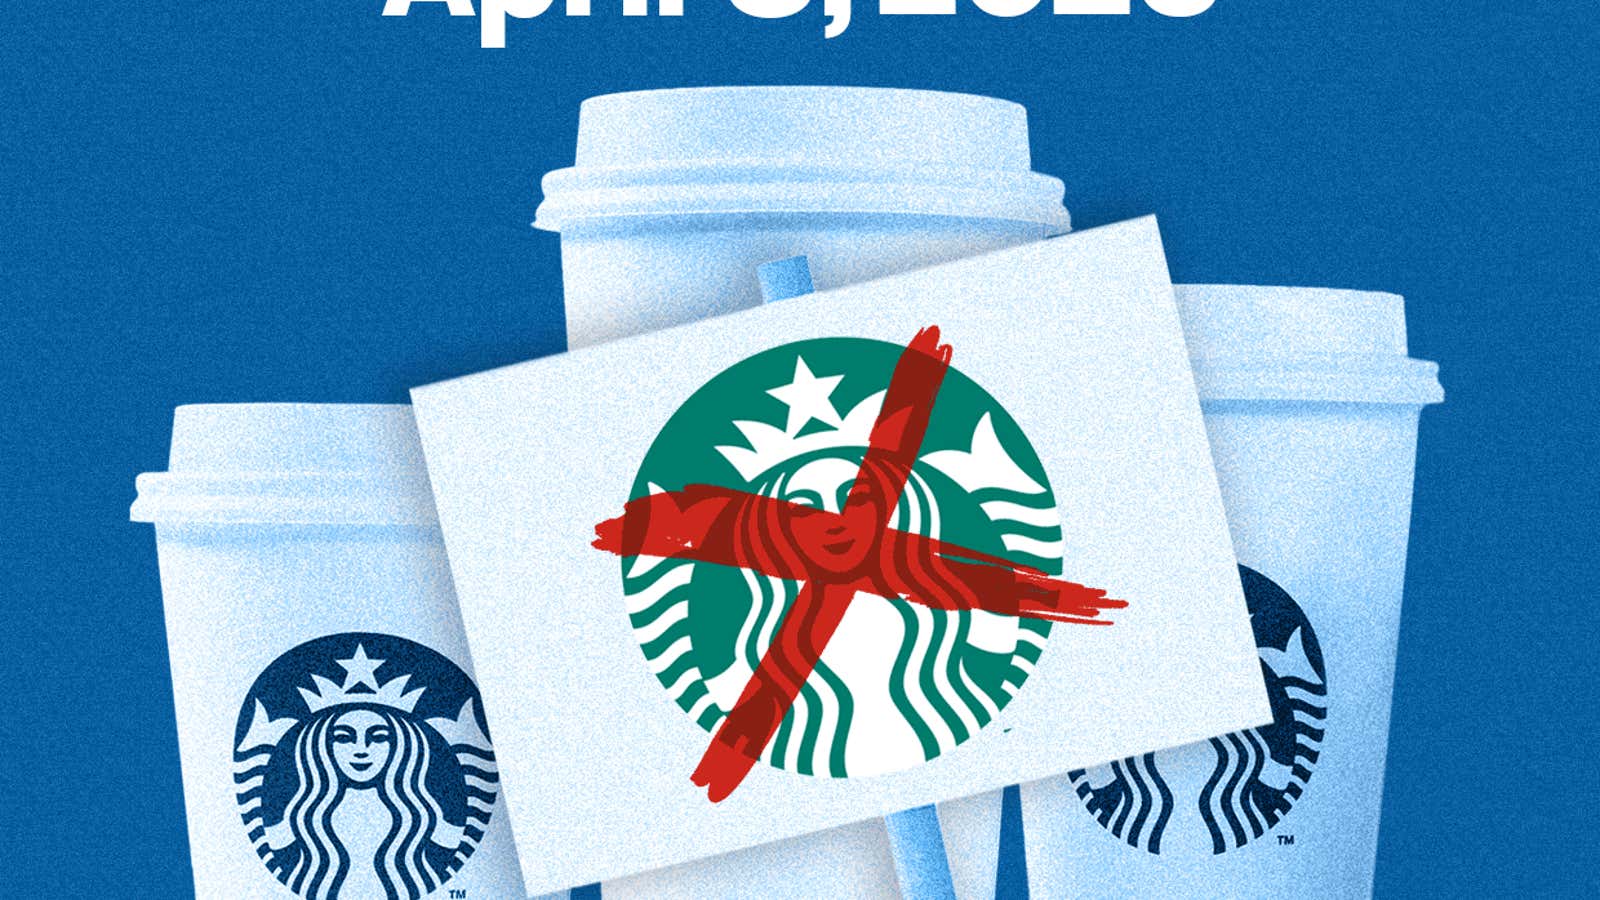 Is Starbucks a workplace laggard now?